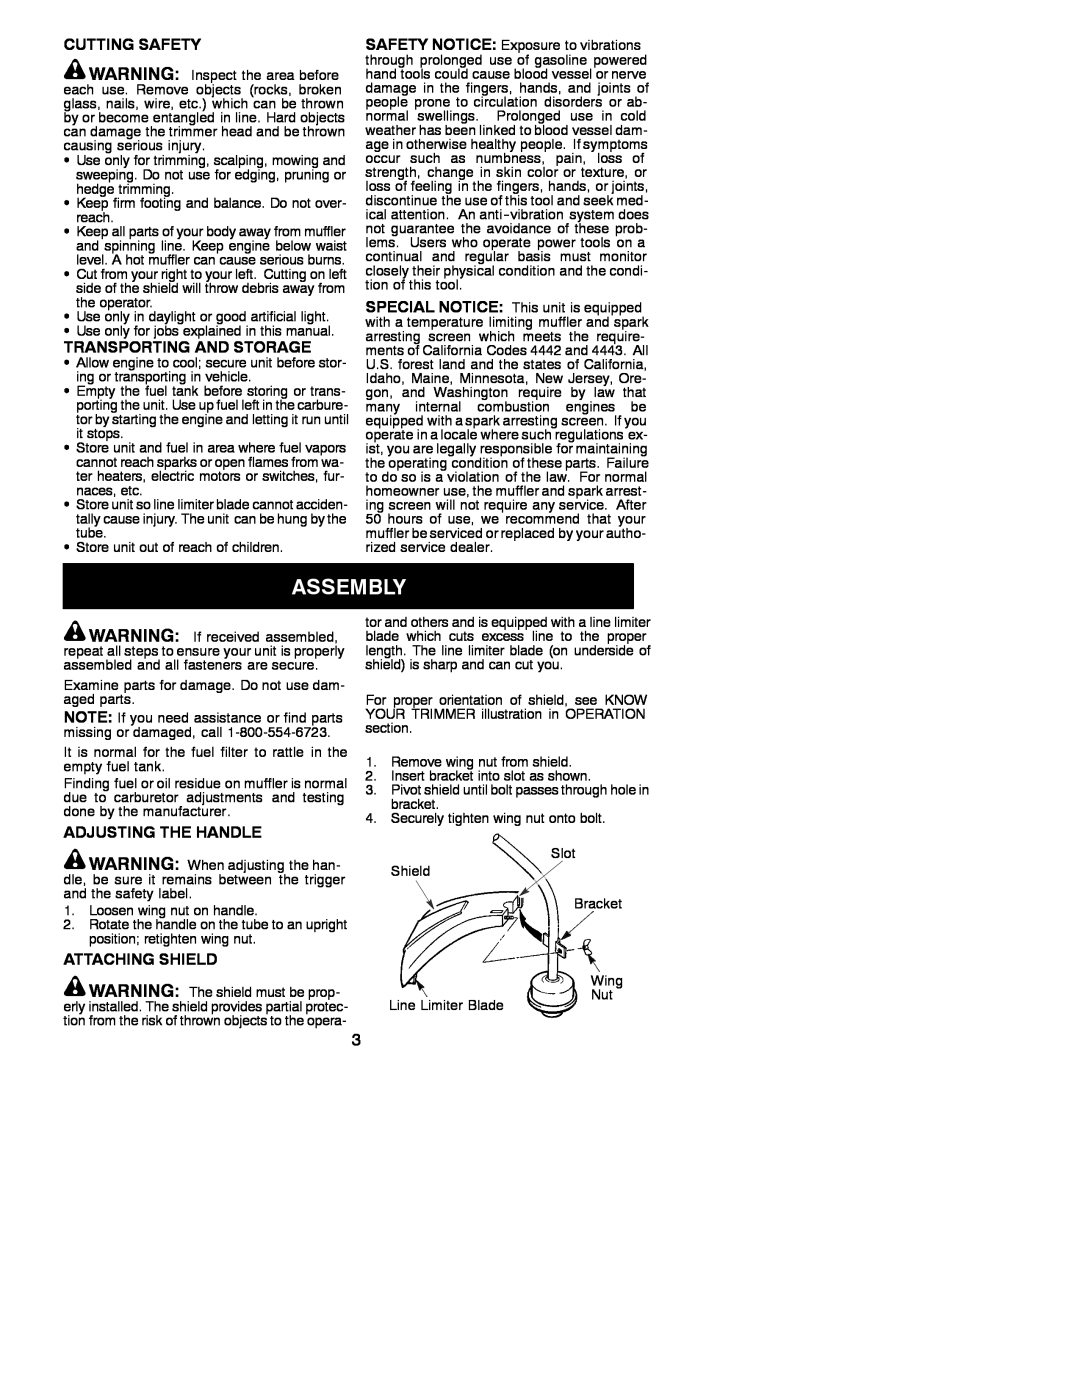 Weed Eater 530086924 instruction manual Cutting Safety, Transporting And Storage, Adjusting The Handle, Attaching Shield 